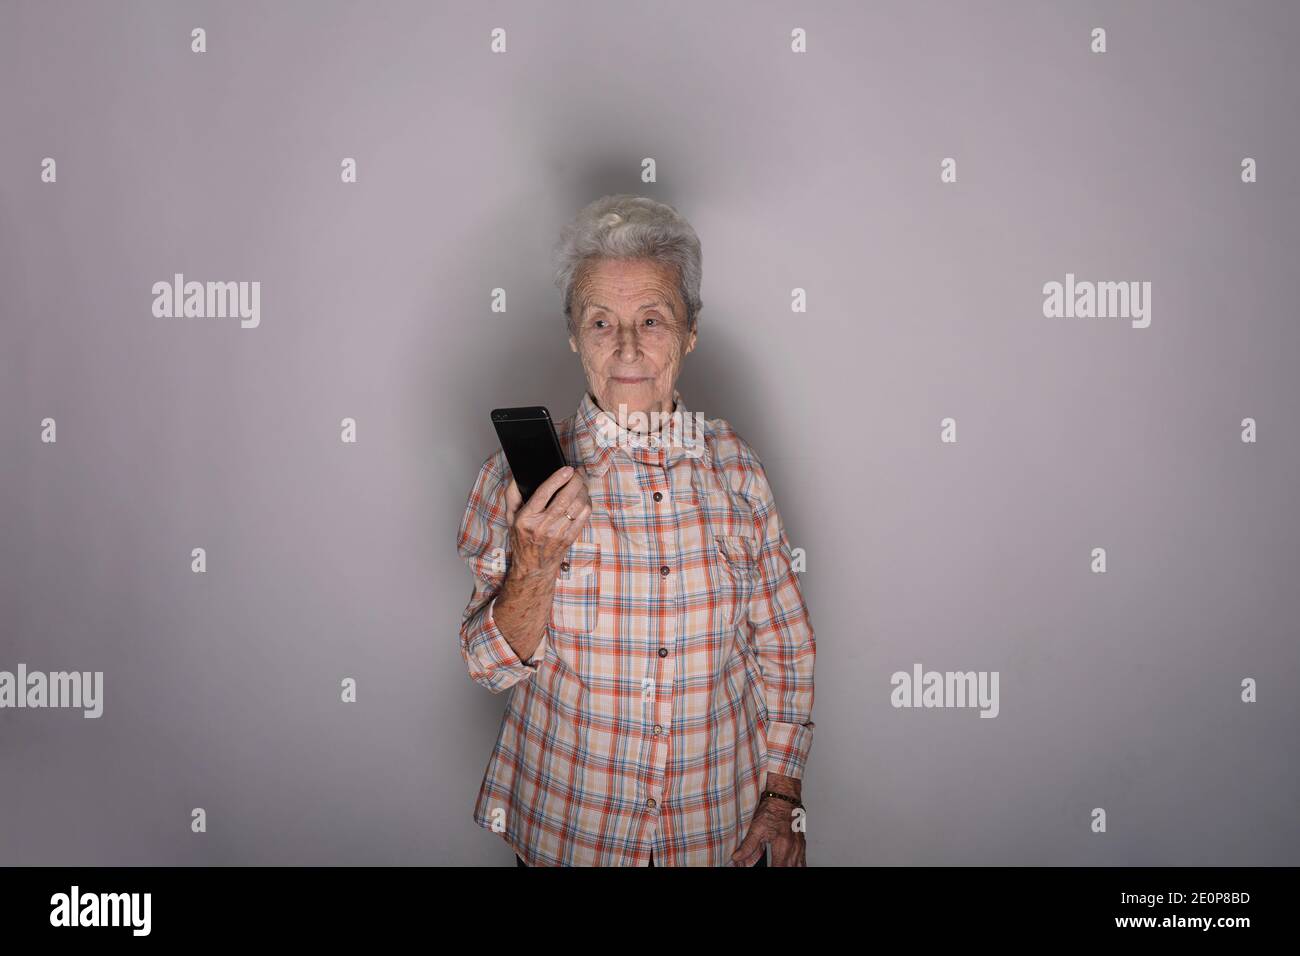 Old woman looking at a smartphone. Stock Photo